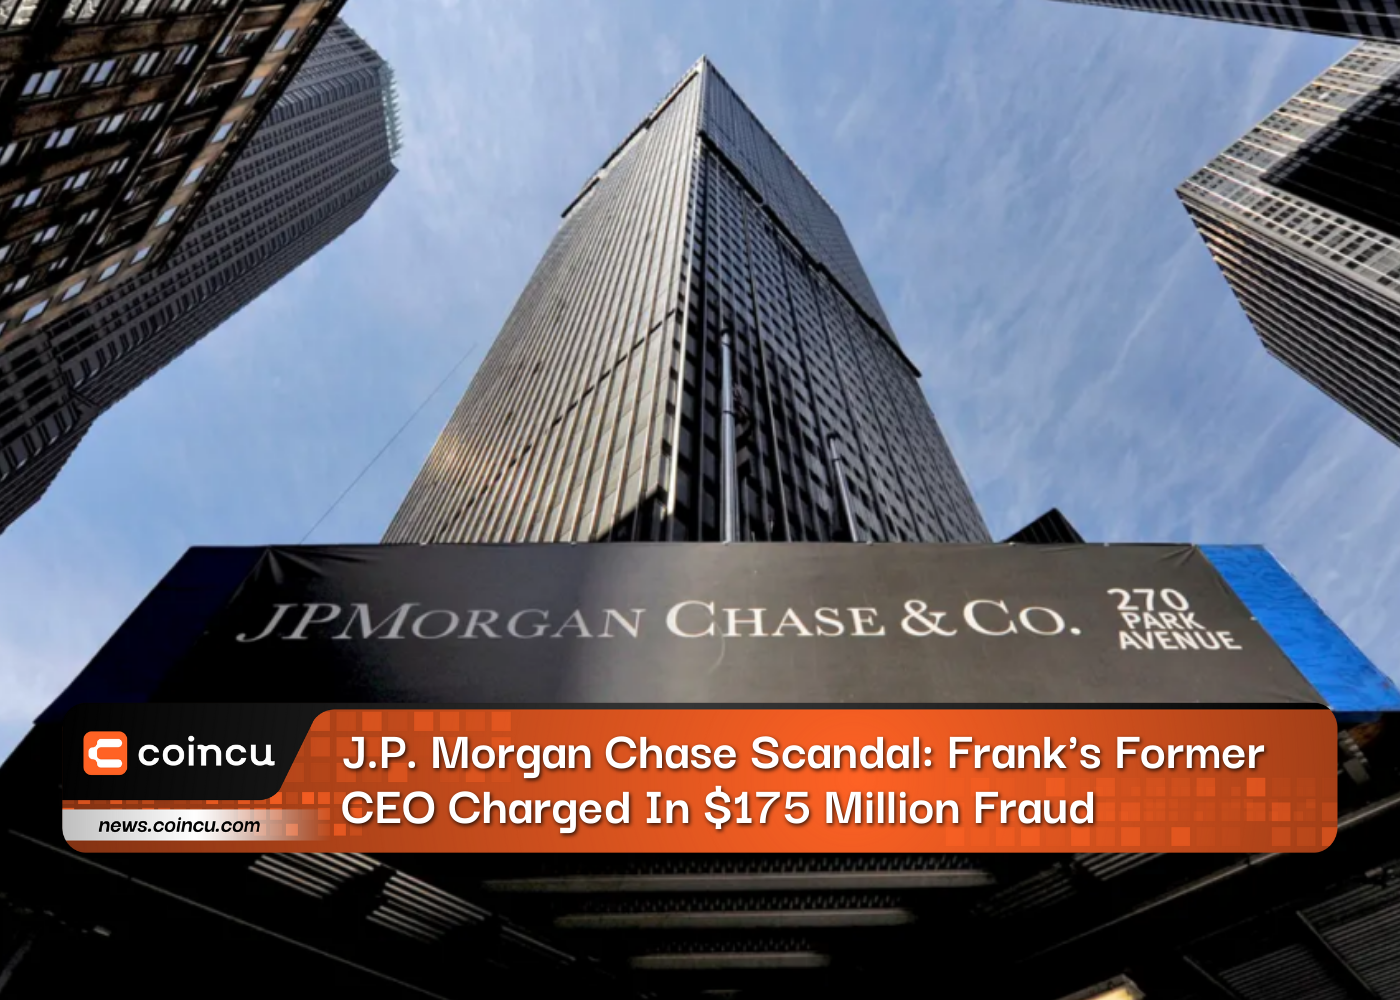 J.P. Morgan Chase Scandal: Frank's Former CEO Charged In $175 Million Fraud